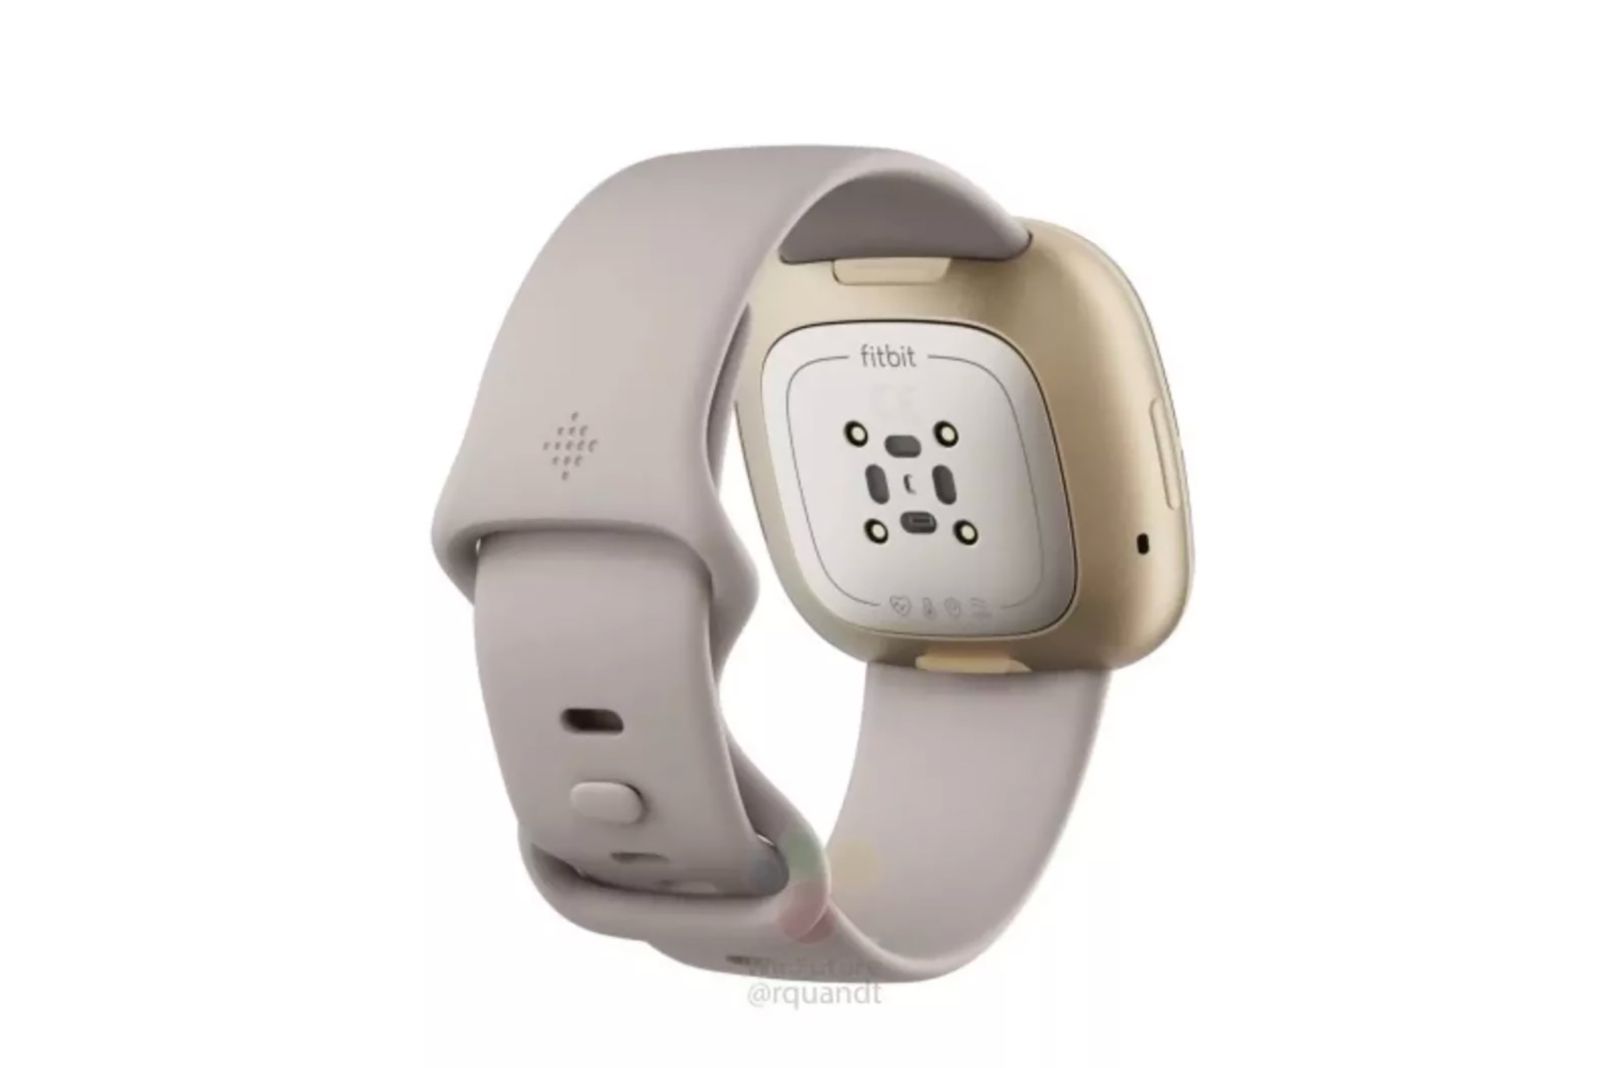 Fitbit Versa 3 and Fitbit Sense button-less smartwatches revealed in leaked images photo 4